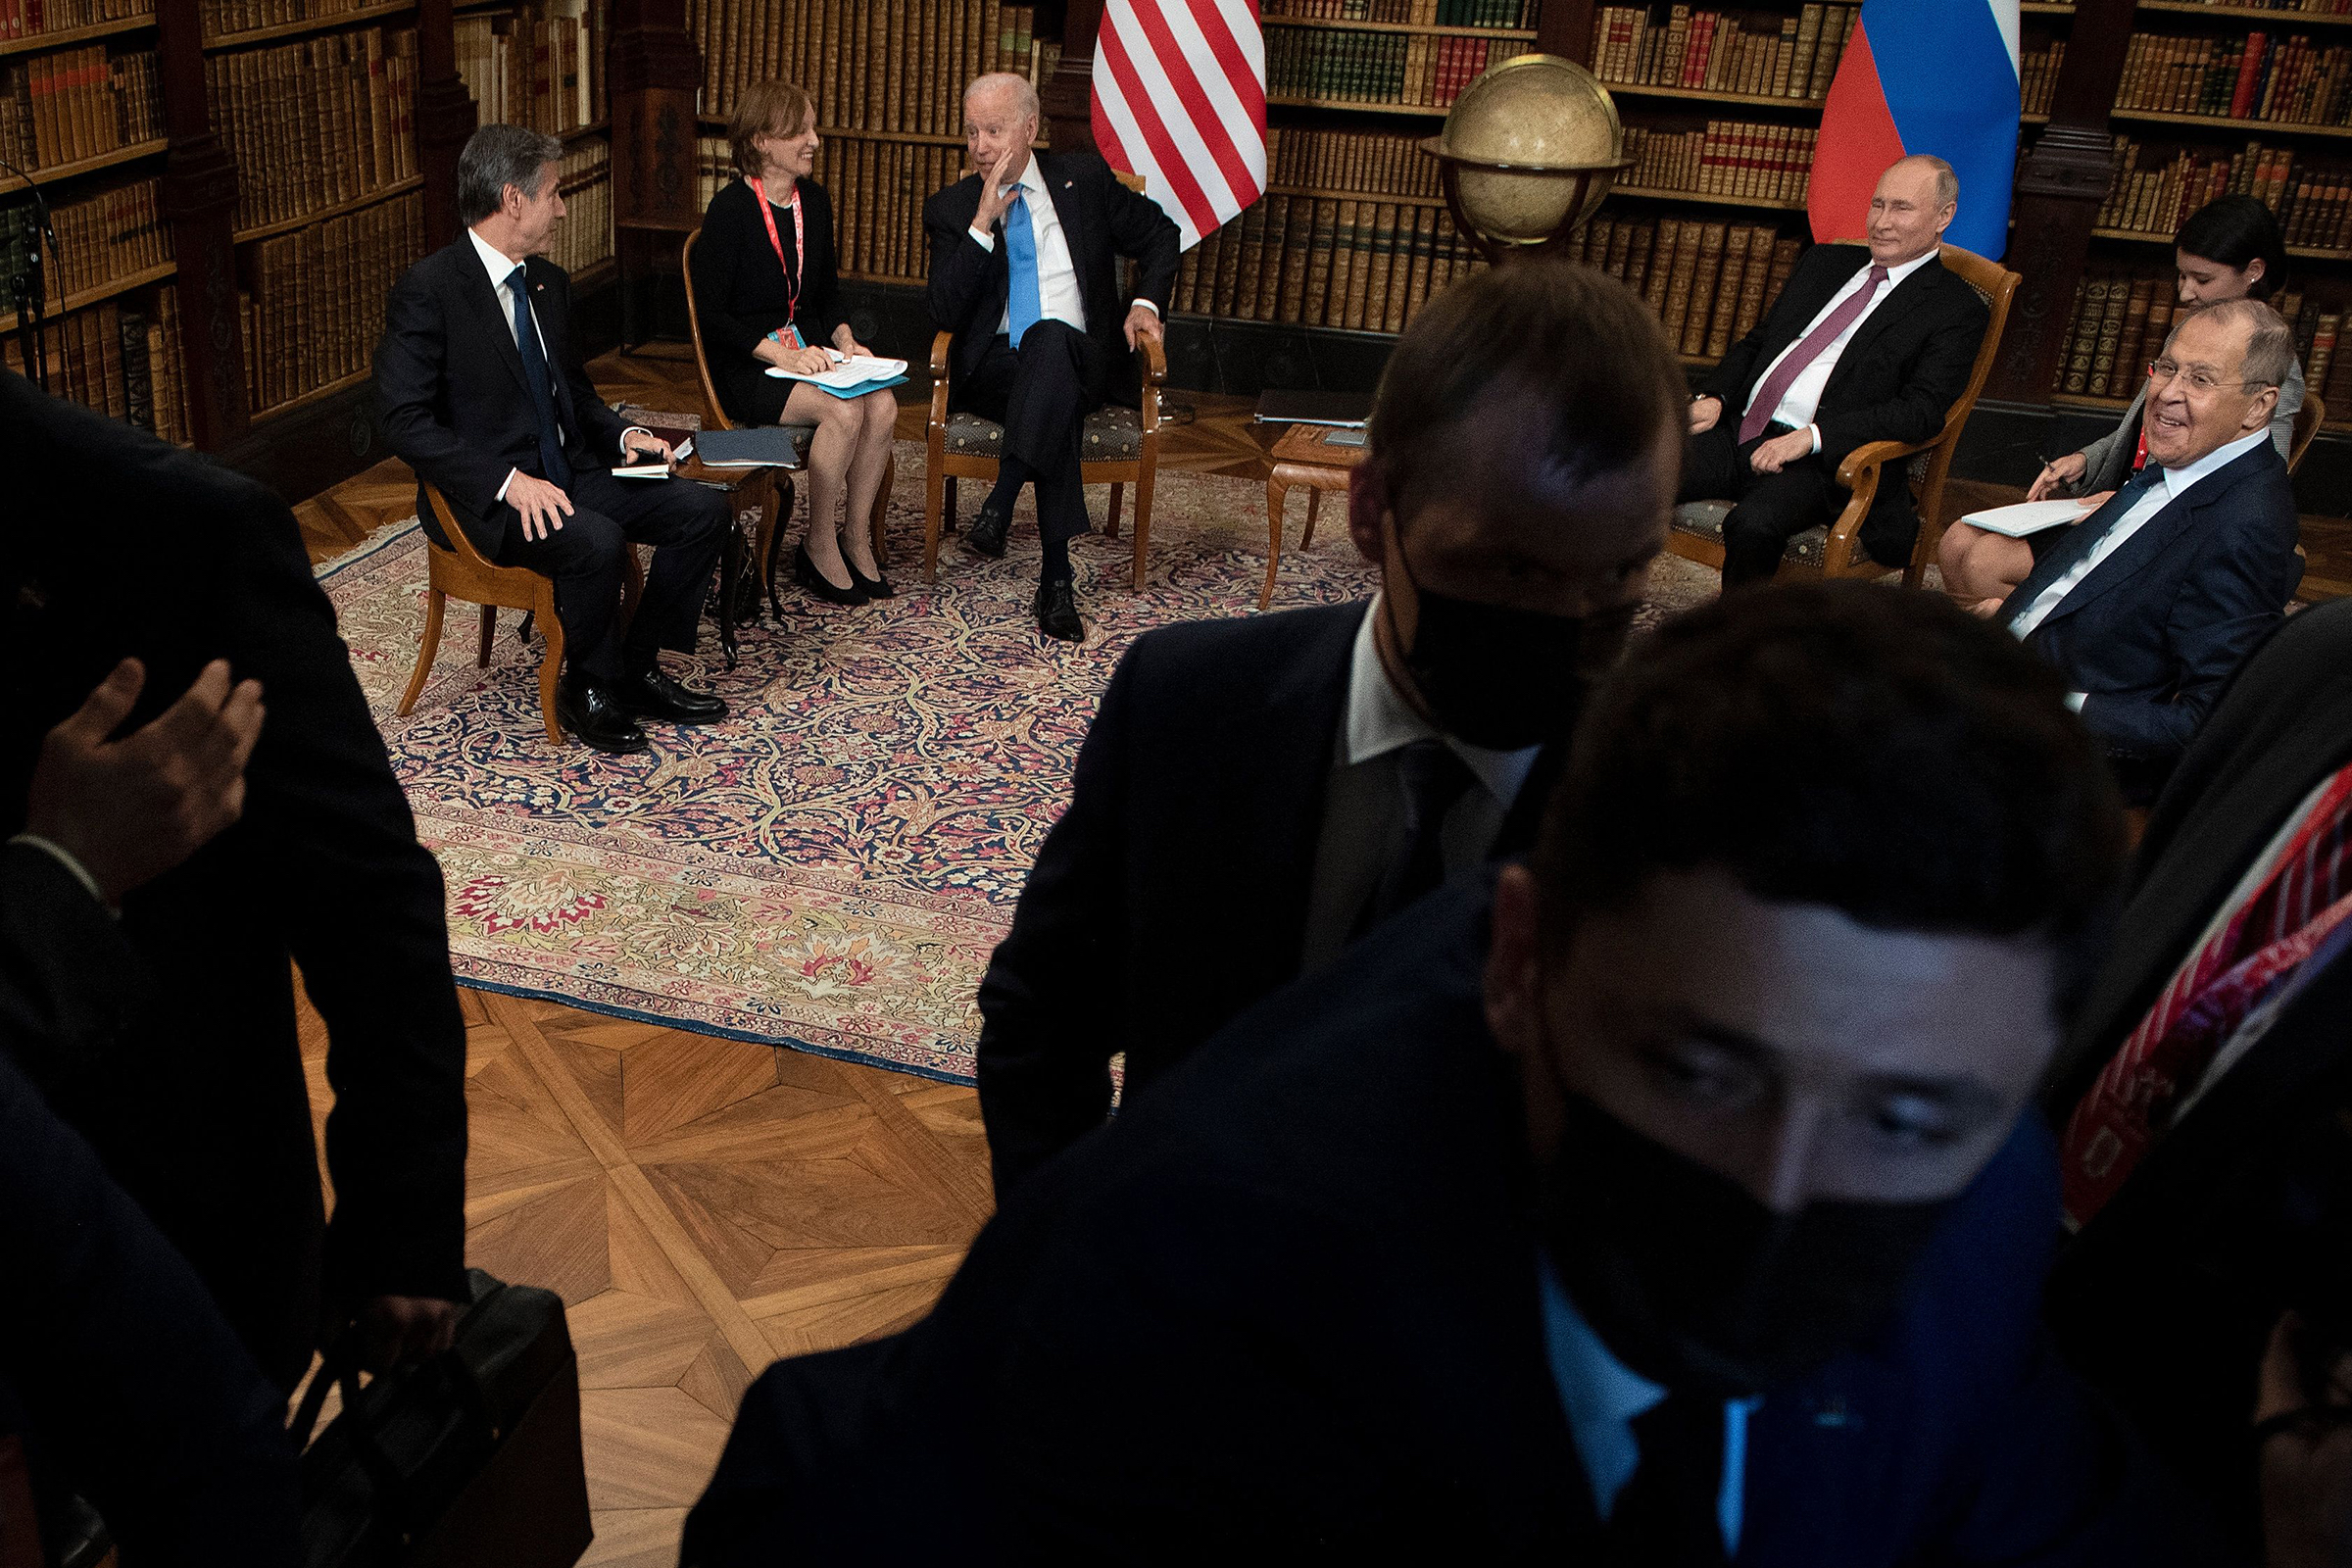 Russian security personnel and others push the press out ahead of a June 16 meeting in Geneva between U.S. President Joe Biden and Russian President Vladimir Putin. Joining the leaders are U.S. Secretary of State Antony Blinken, left, and Russian Foreign Minister Sergey Lavrov, right. (Brendan Smialowski—AFP/Getty Images)